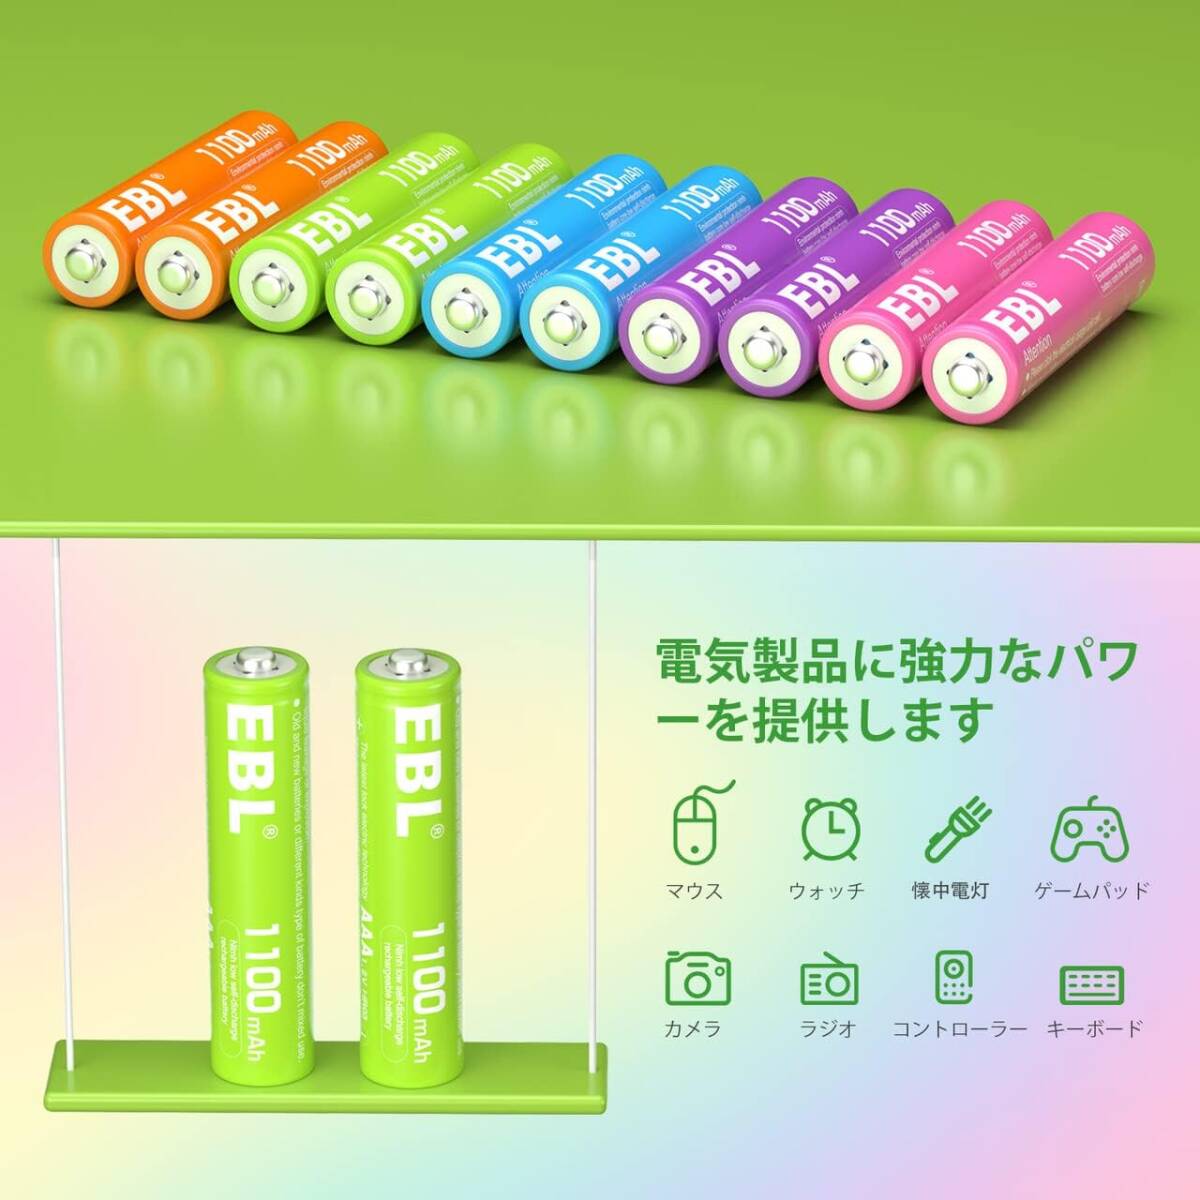  single 4 rechargeable battery colorful rechargeable Nickel-Metal Hydride battery 1100mAh 10 pcs insertion . battery case attaching using dividing easy repetition charge possibility AAA battery toy 